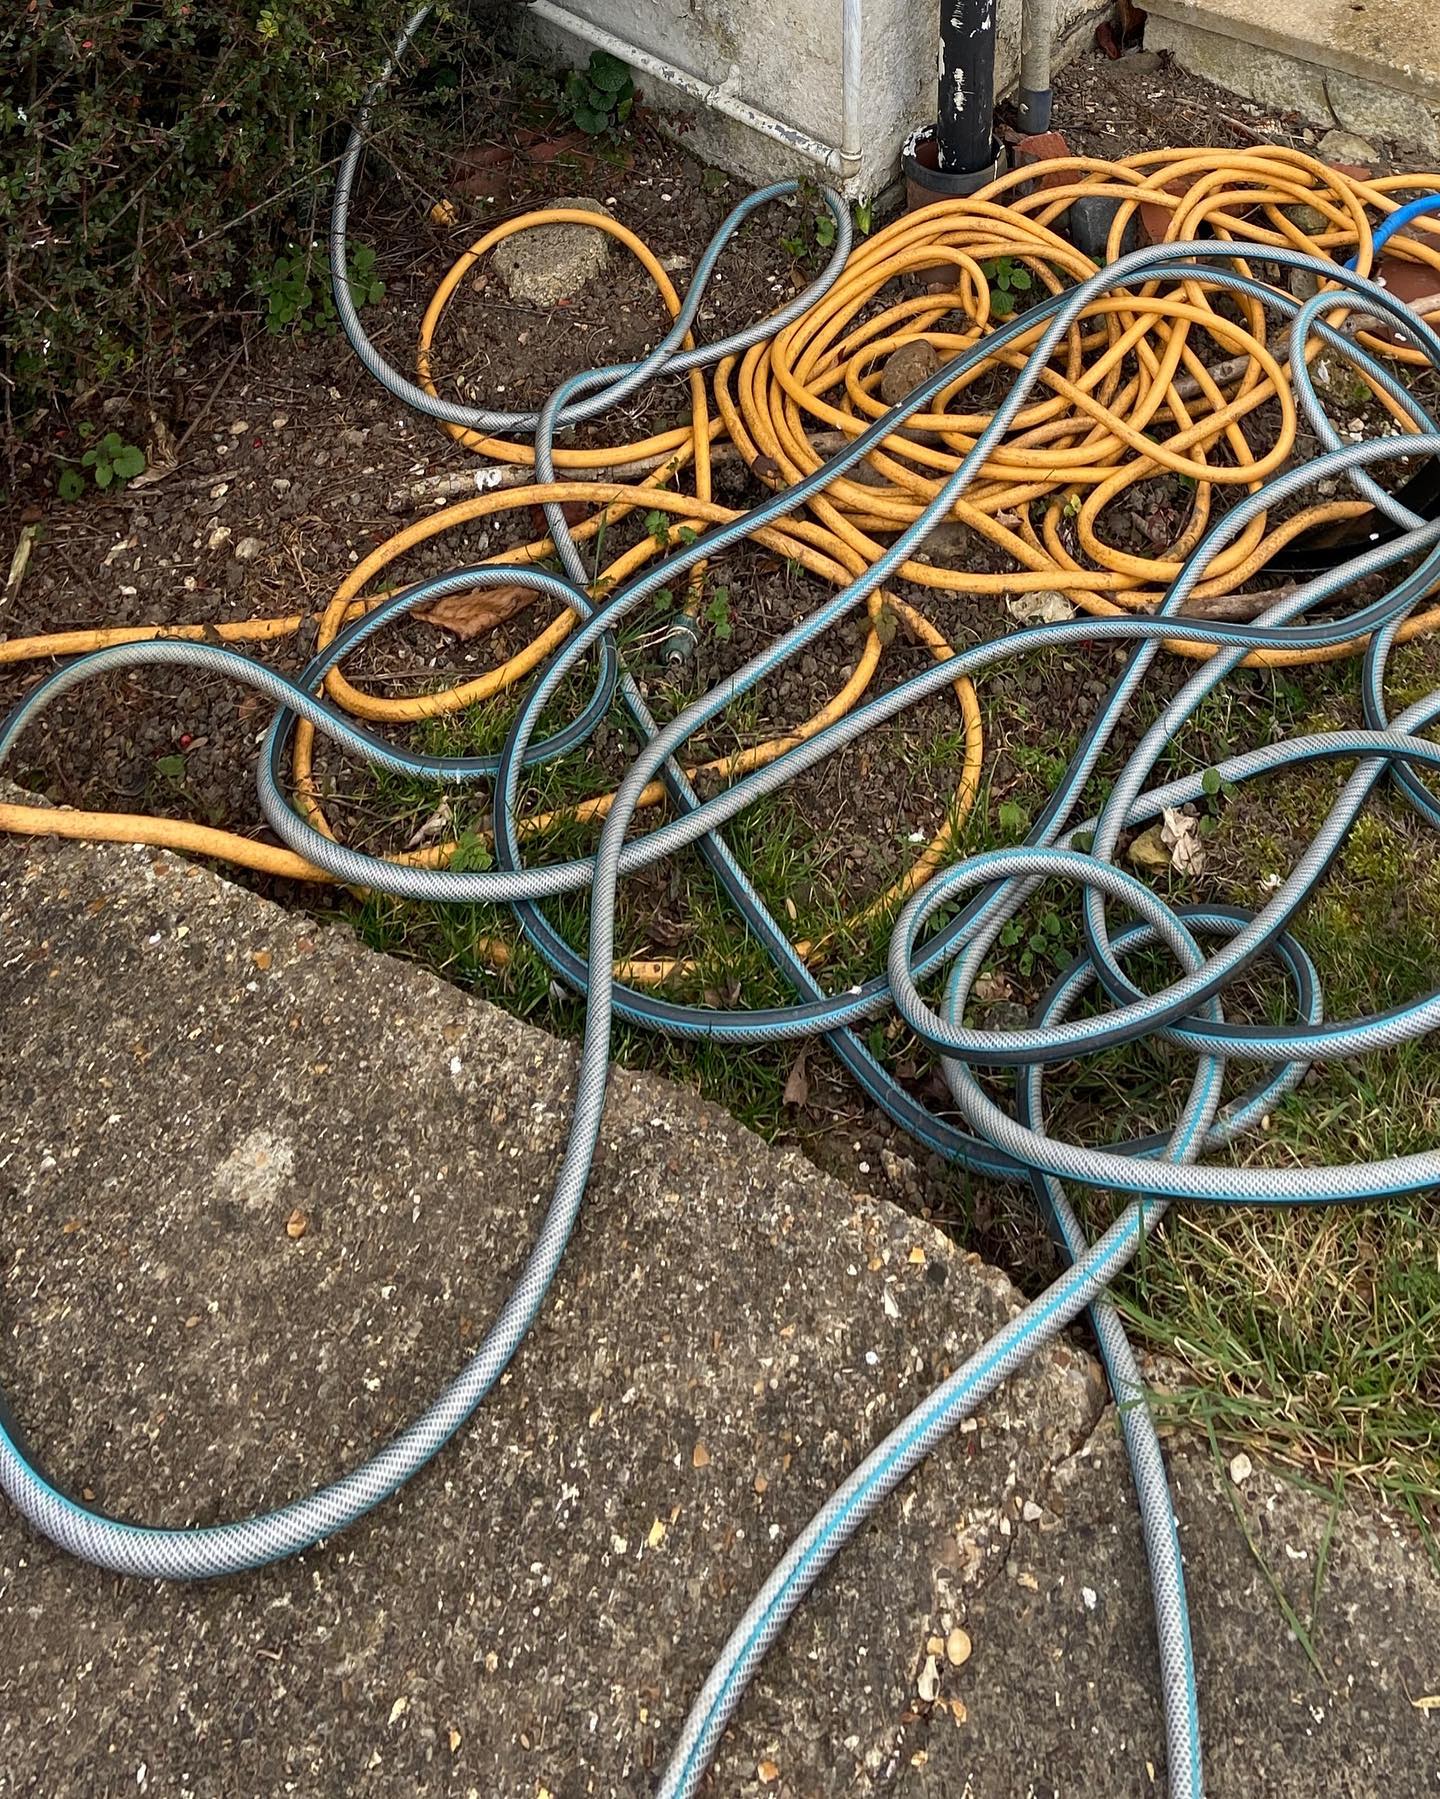 yellow and blue hoses tangle like snakes on a thin dusting of concrete and grass